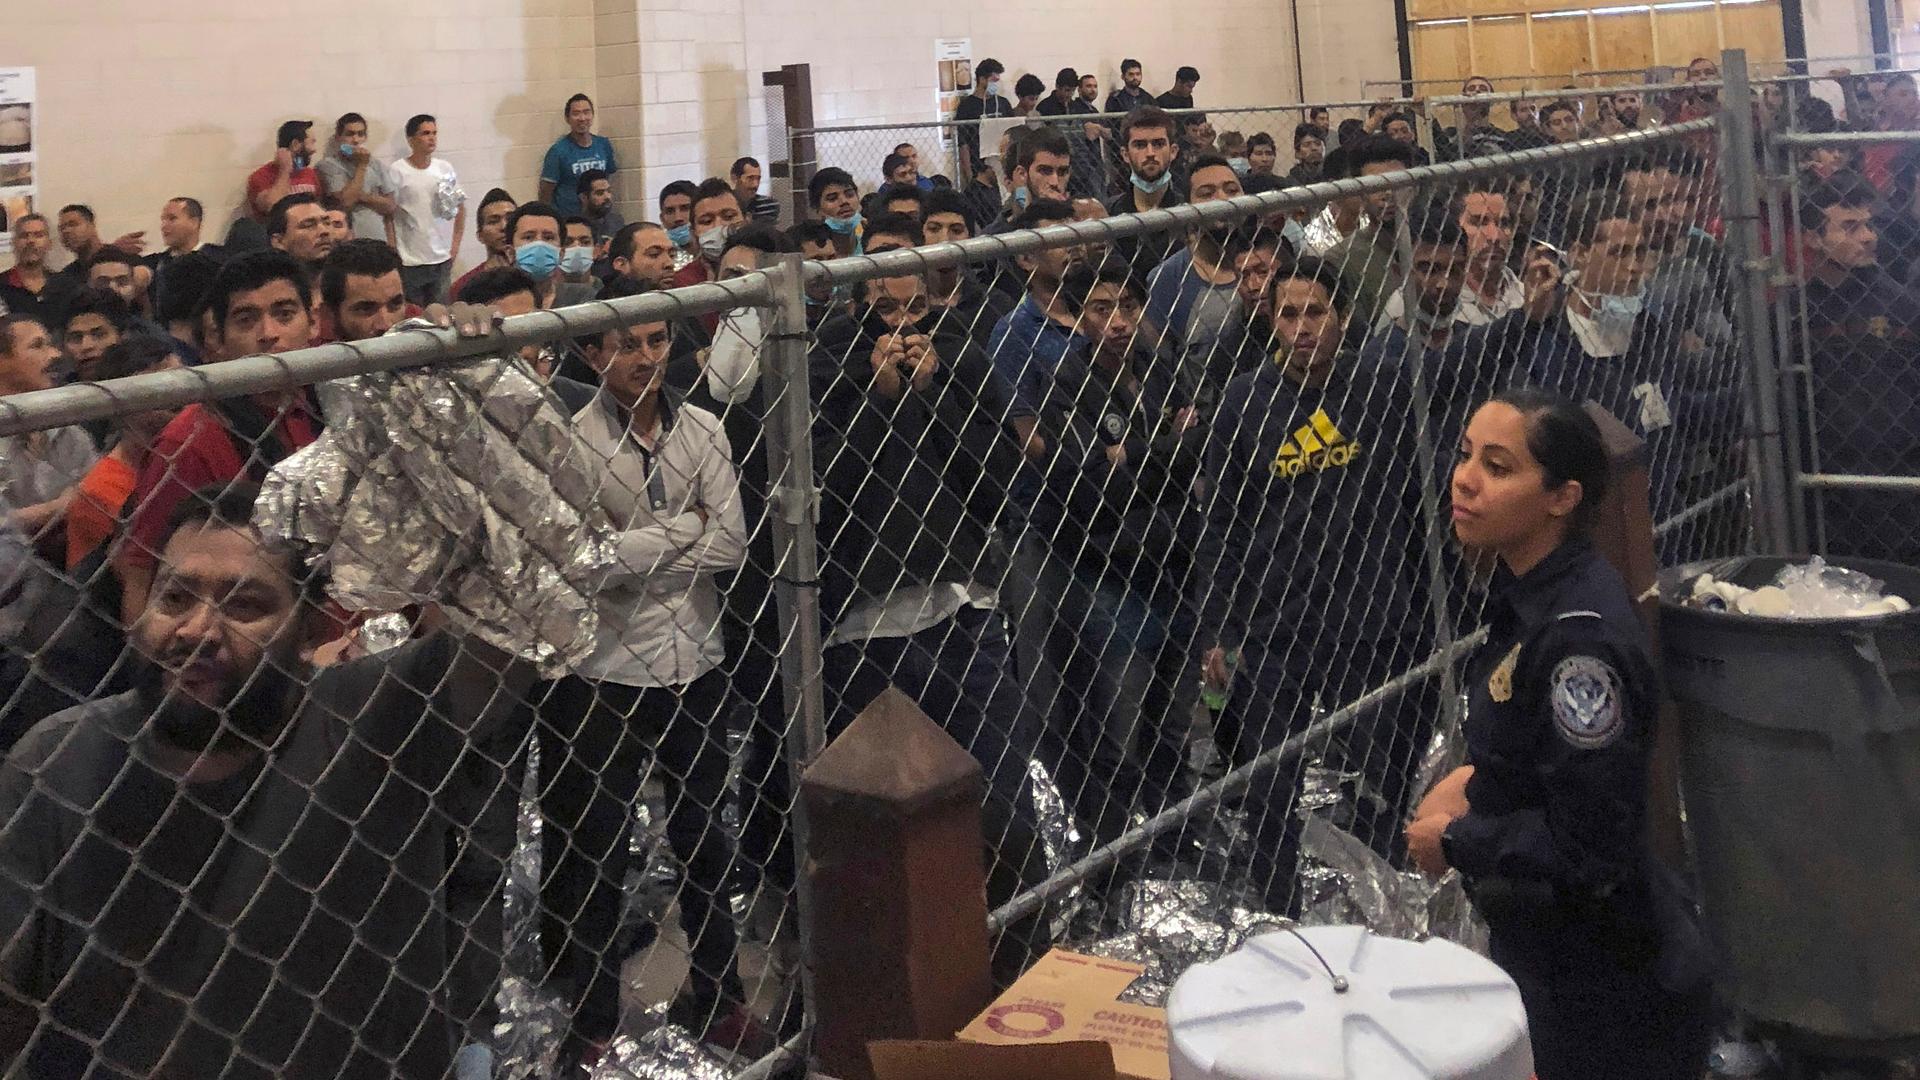 A group of men stand behind a fenced area within a detention center at the border.